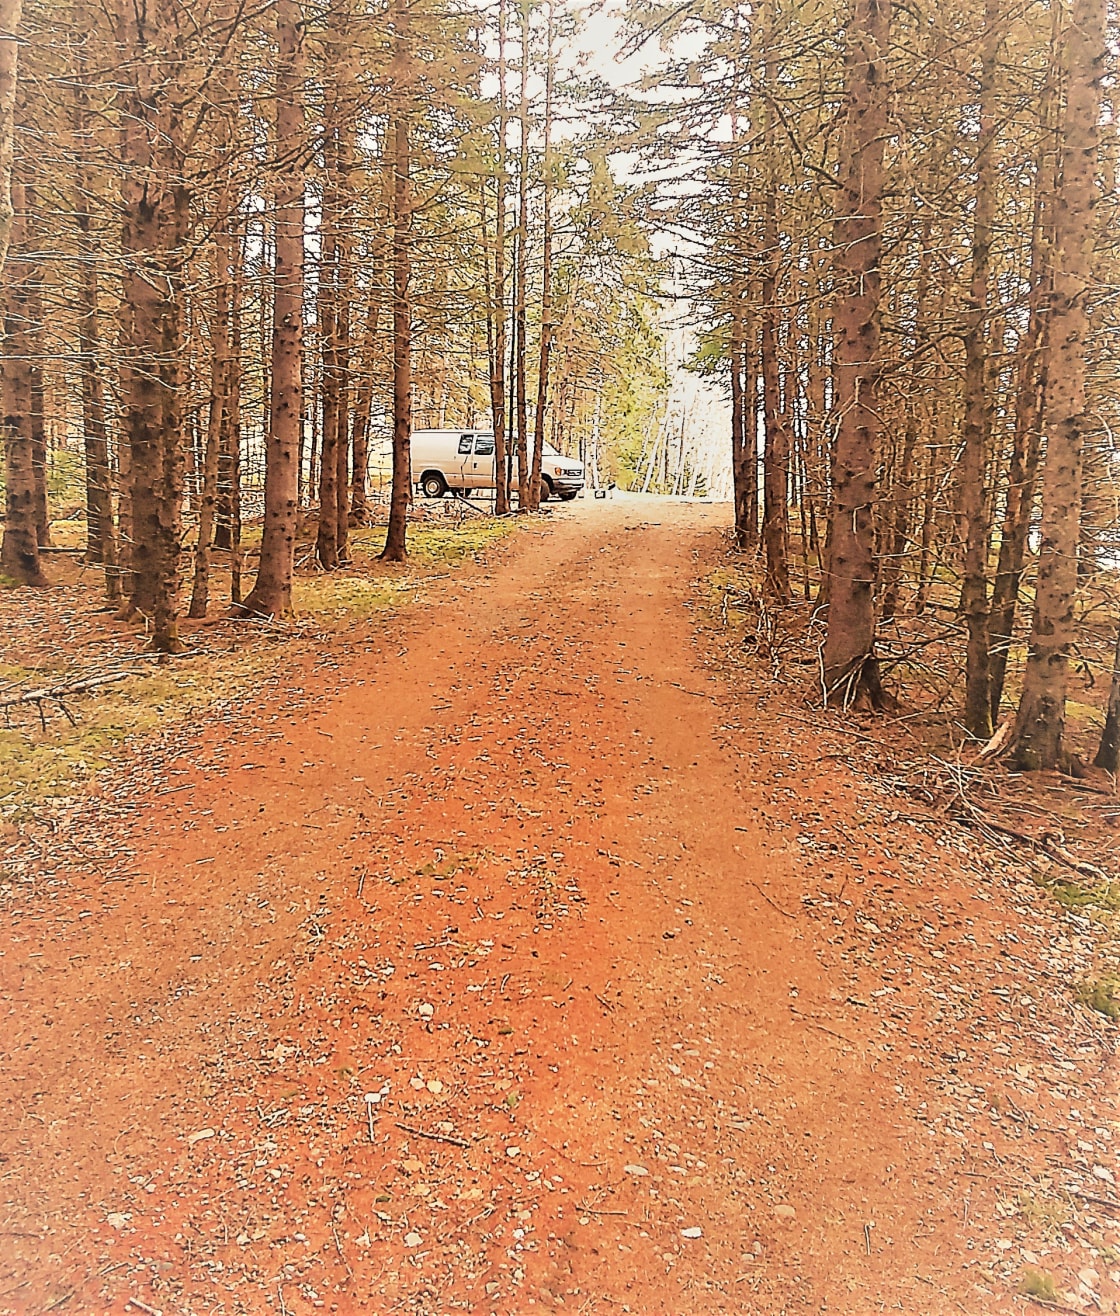 Driveway - toward parking area. No 4WD needed, big RVs have driven in with no problems. 